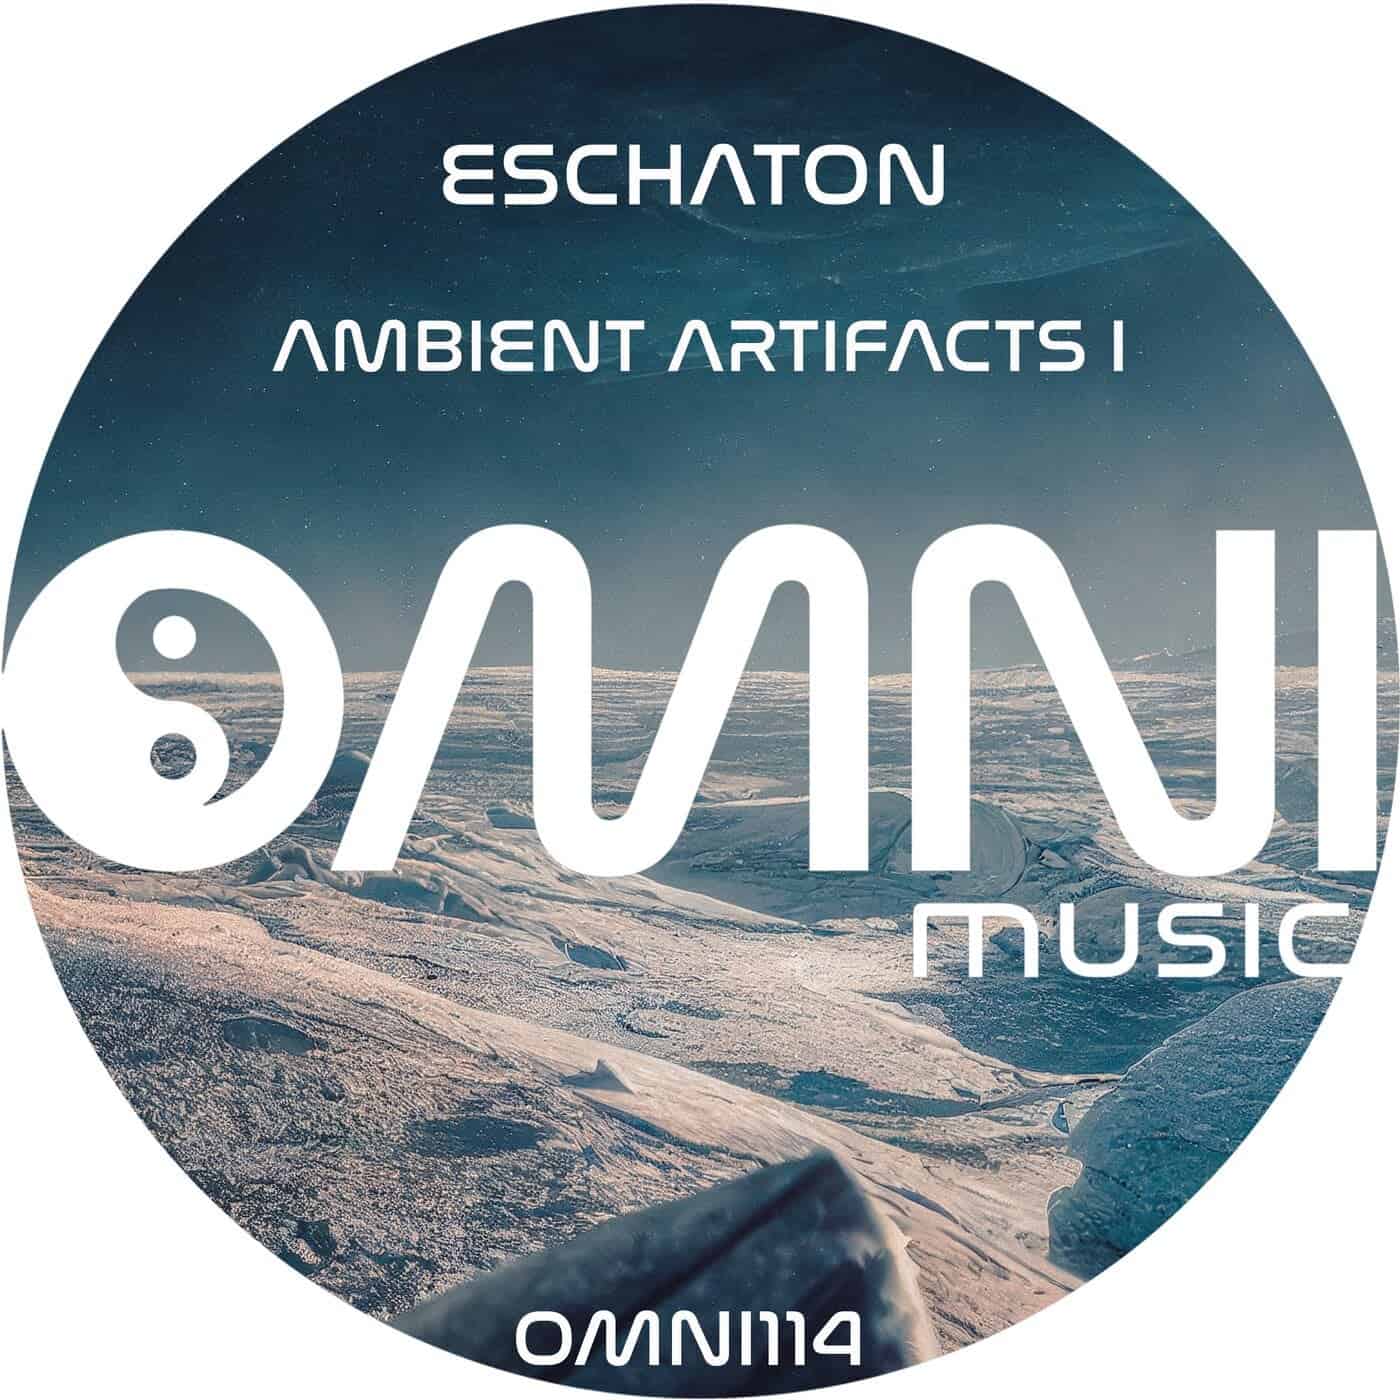 Download Eschaton - Ambient Artifacts I on Electrobuzz